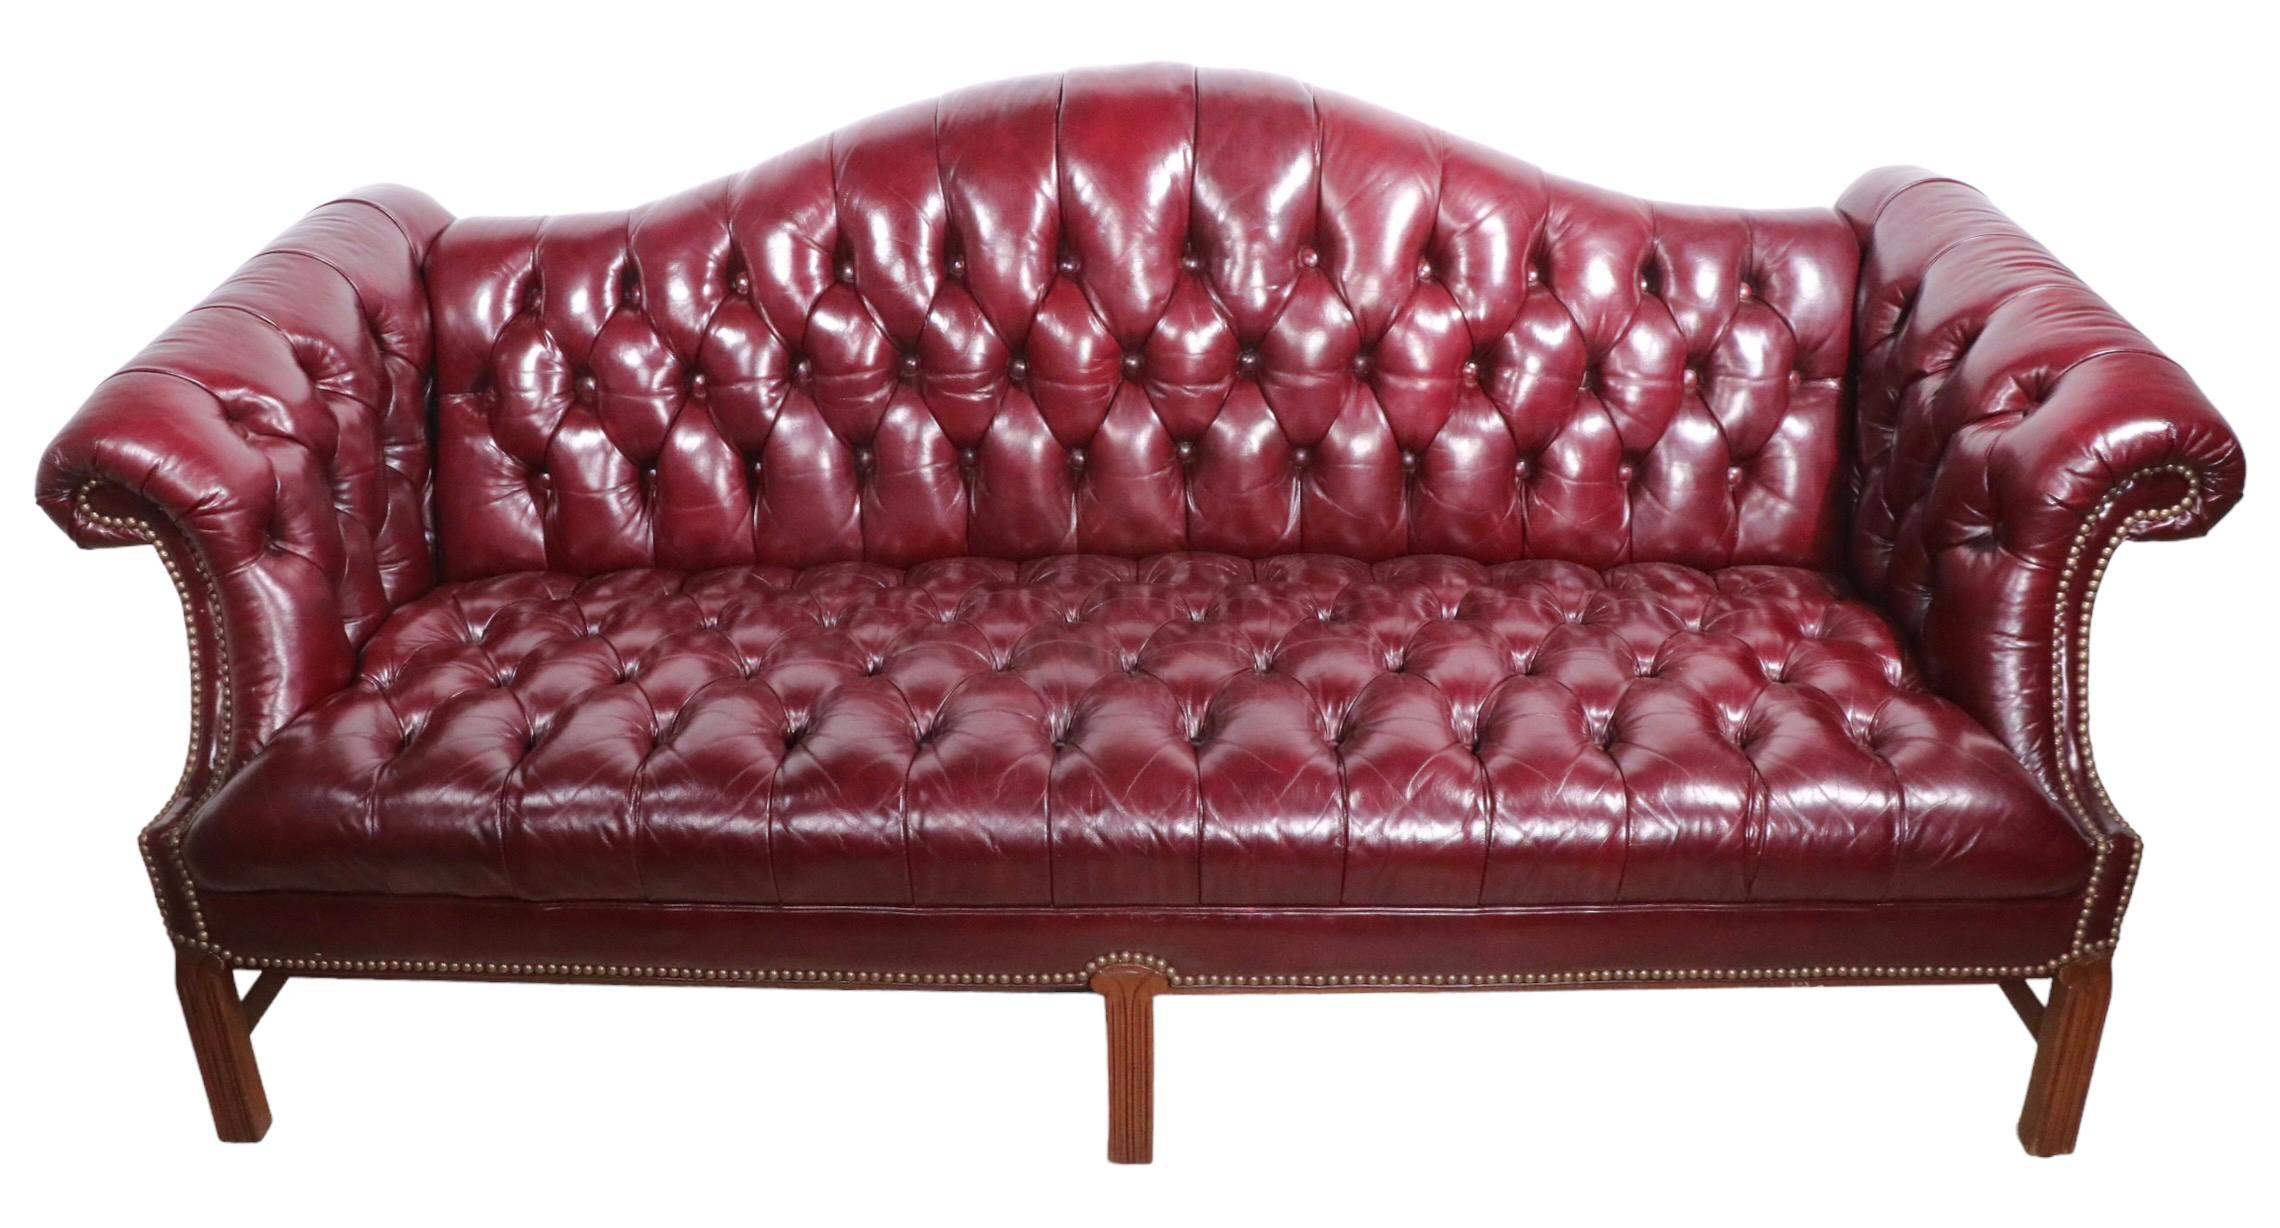 British  Tufted Burgundy  Leather Chesterfield Sofa c 1950/1960's For Sale